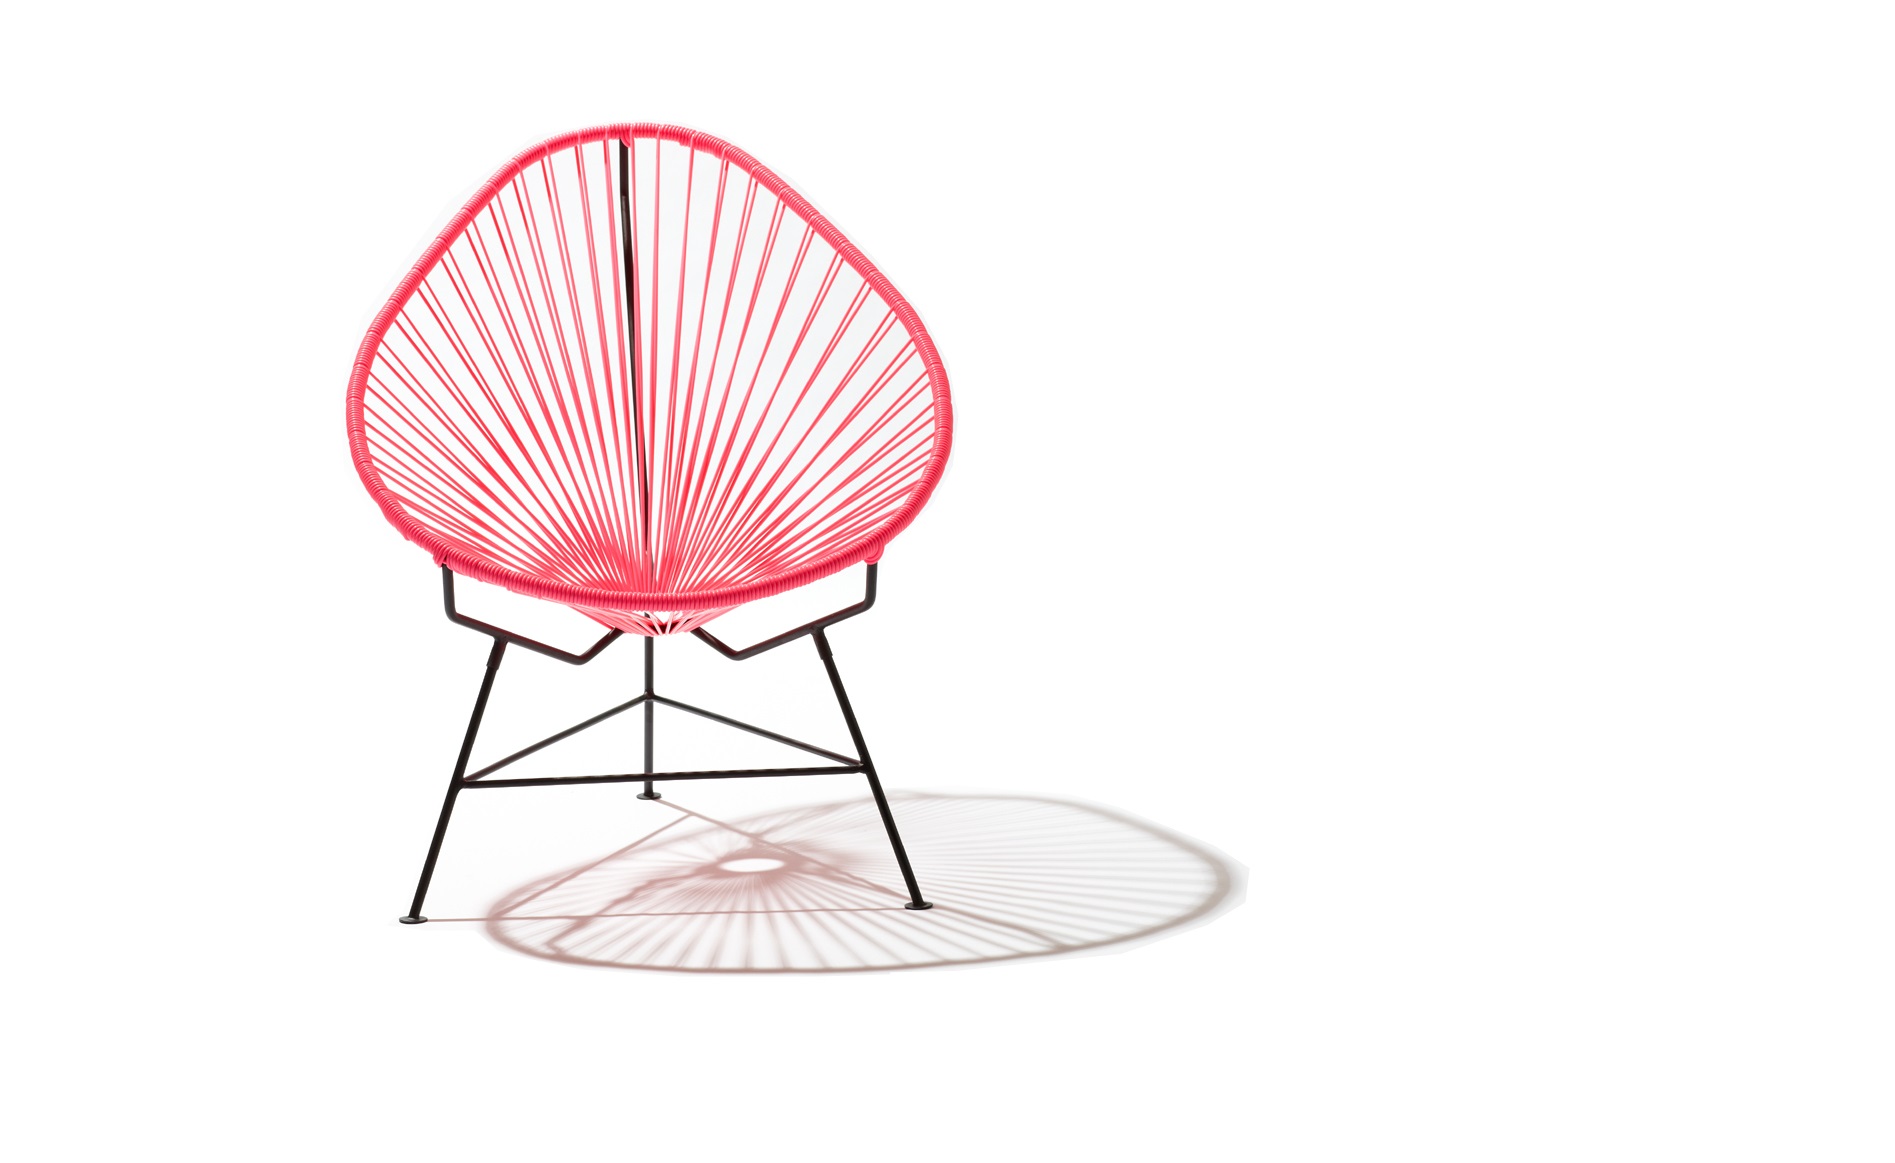 ACAPULCO CHAIR Wide x Deep x High (720x770x830)mm Seat 420 mm Price: 1.500.000 VND/ chair